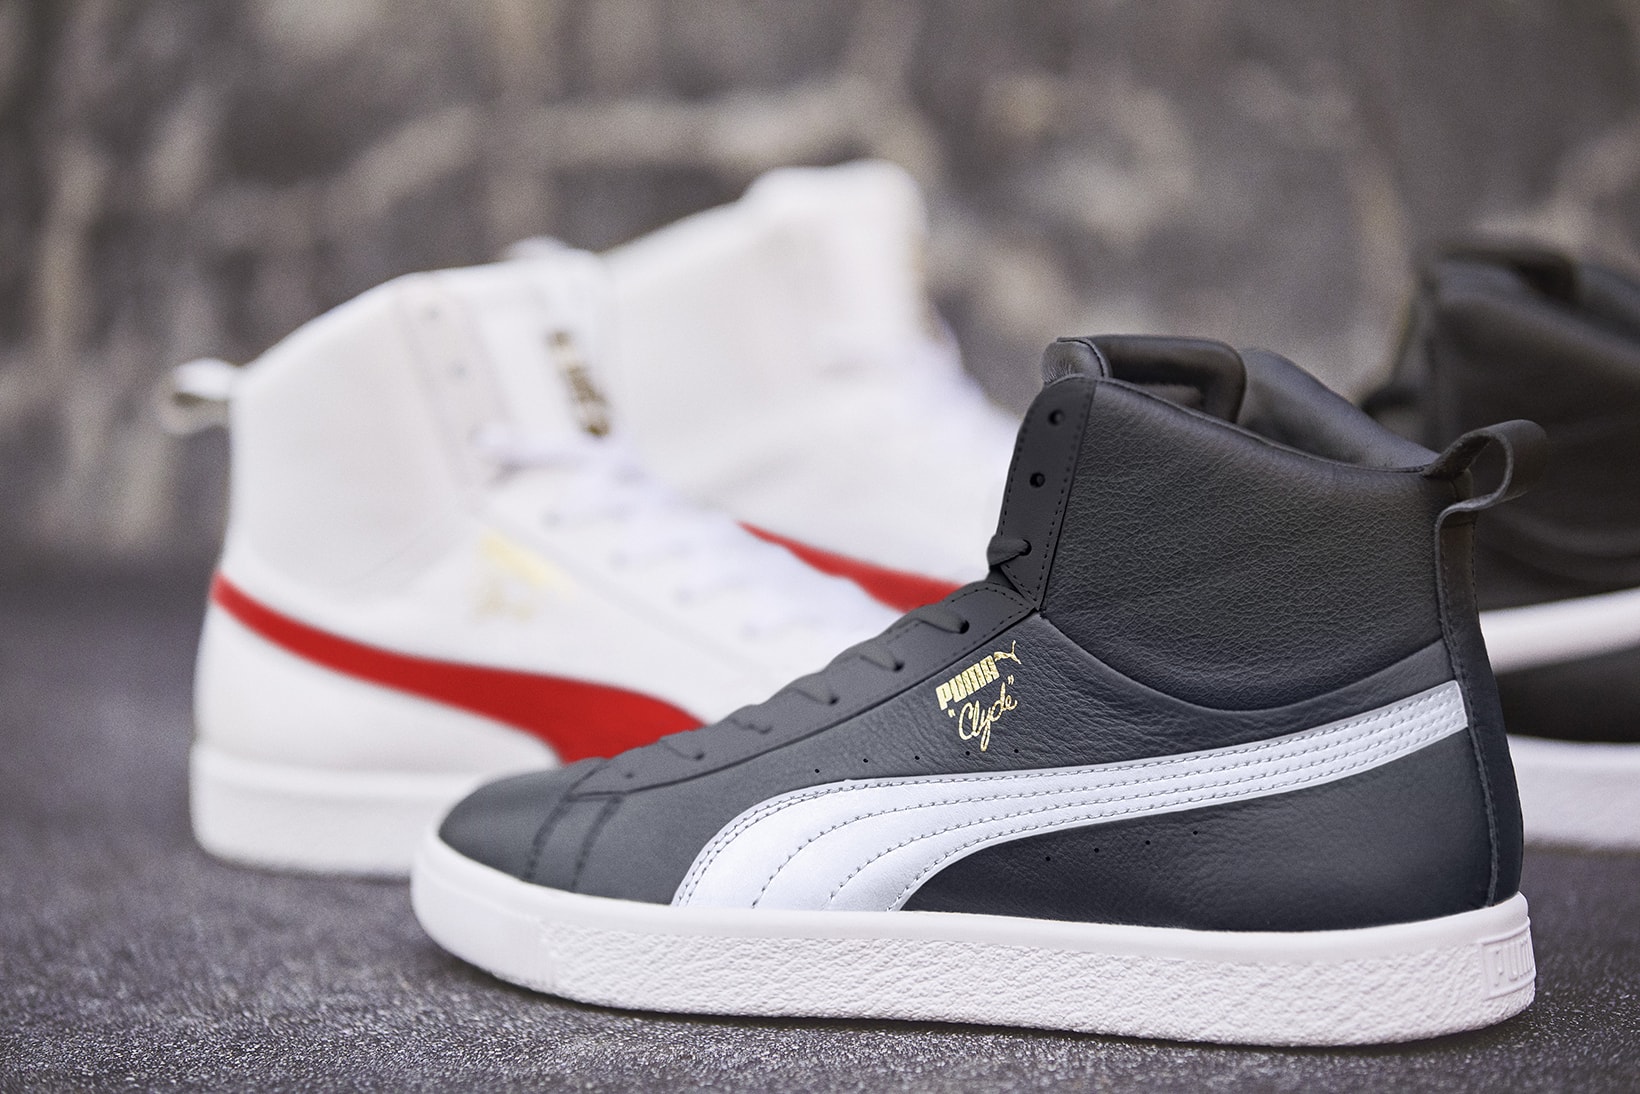 PUMA Clyde Mid Foil Sneakers Shoes Footwear 2017 August Release Date info black white red